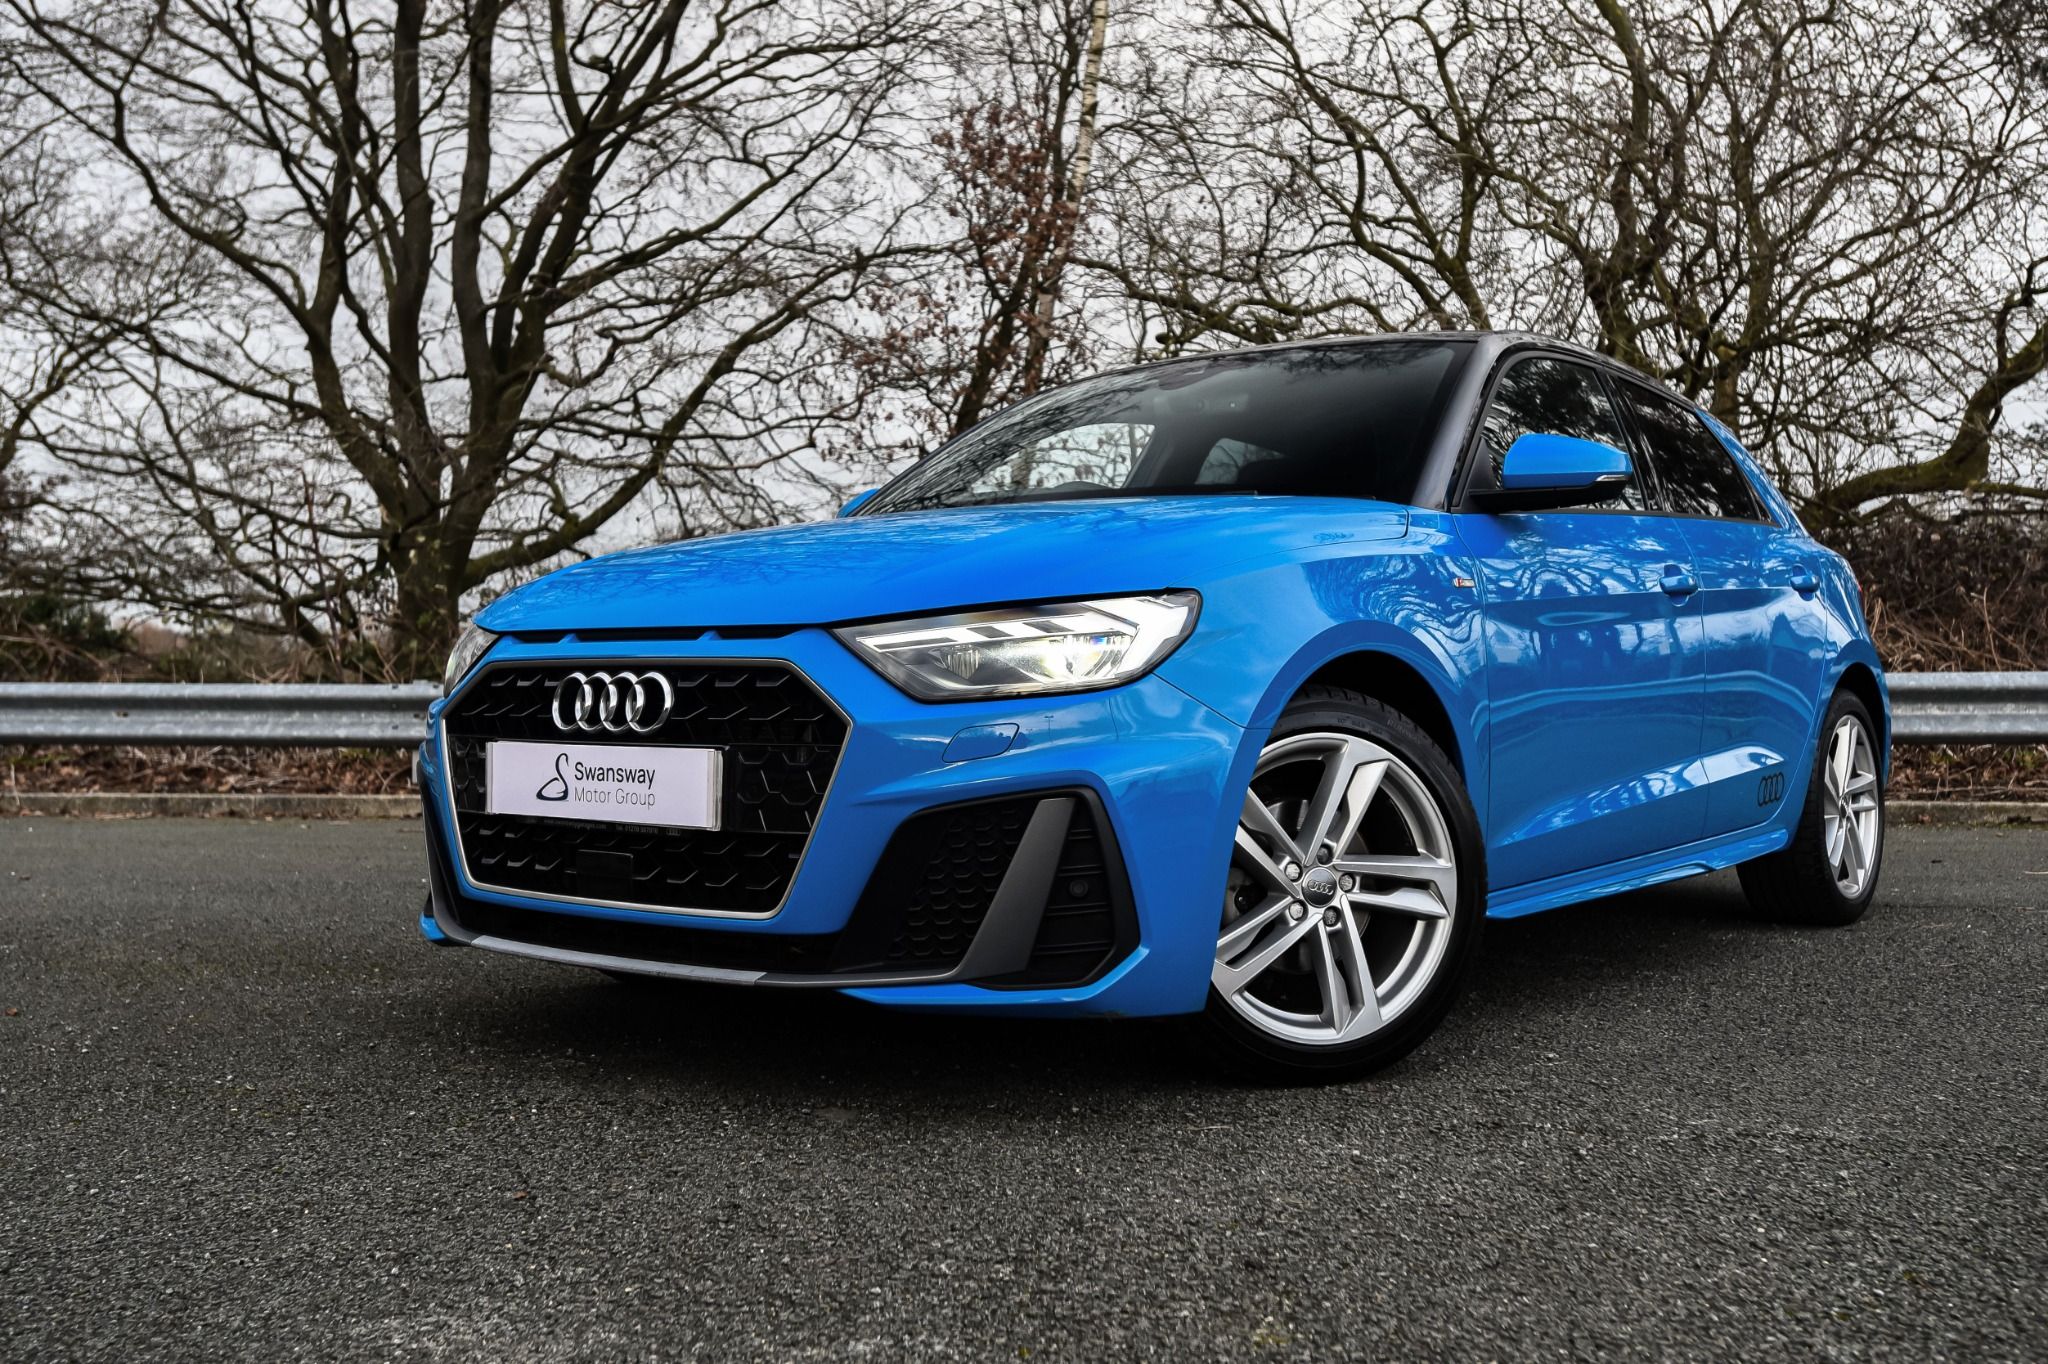 Front view of blue Audi A1 Sportback